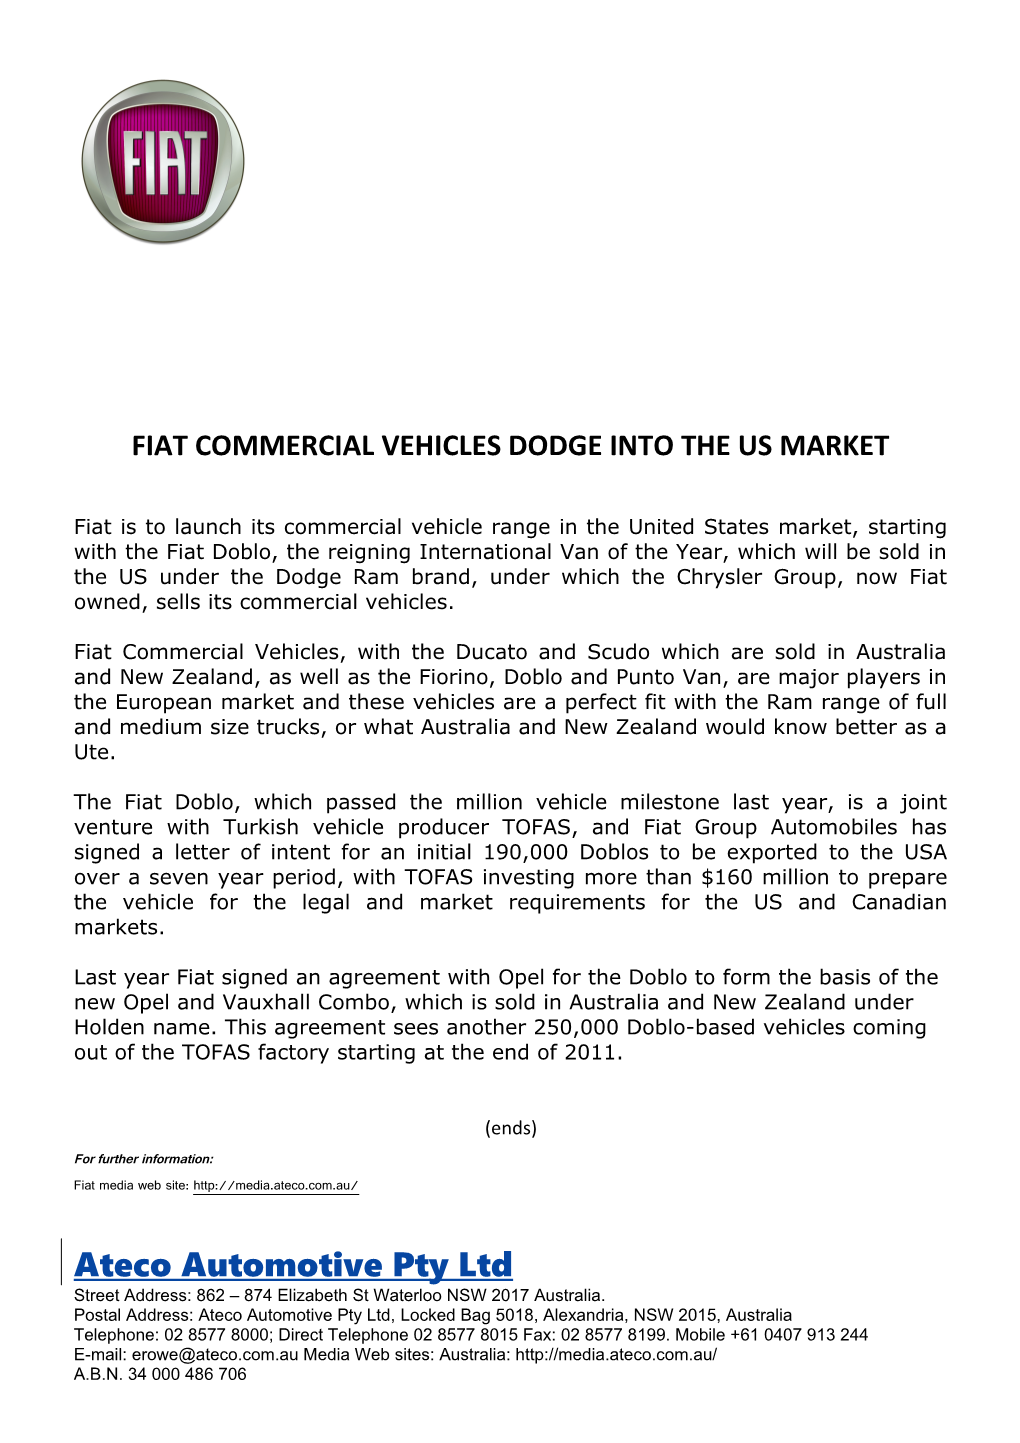 Fiat Commercial Vehicles Dodge Into the Us Market